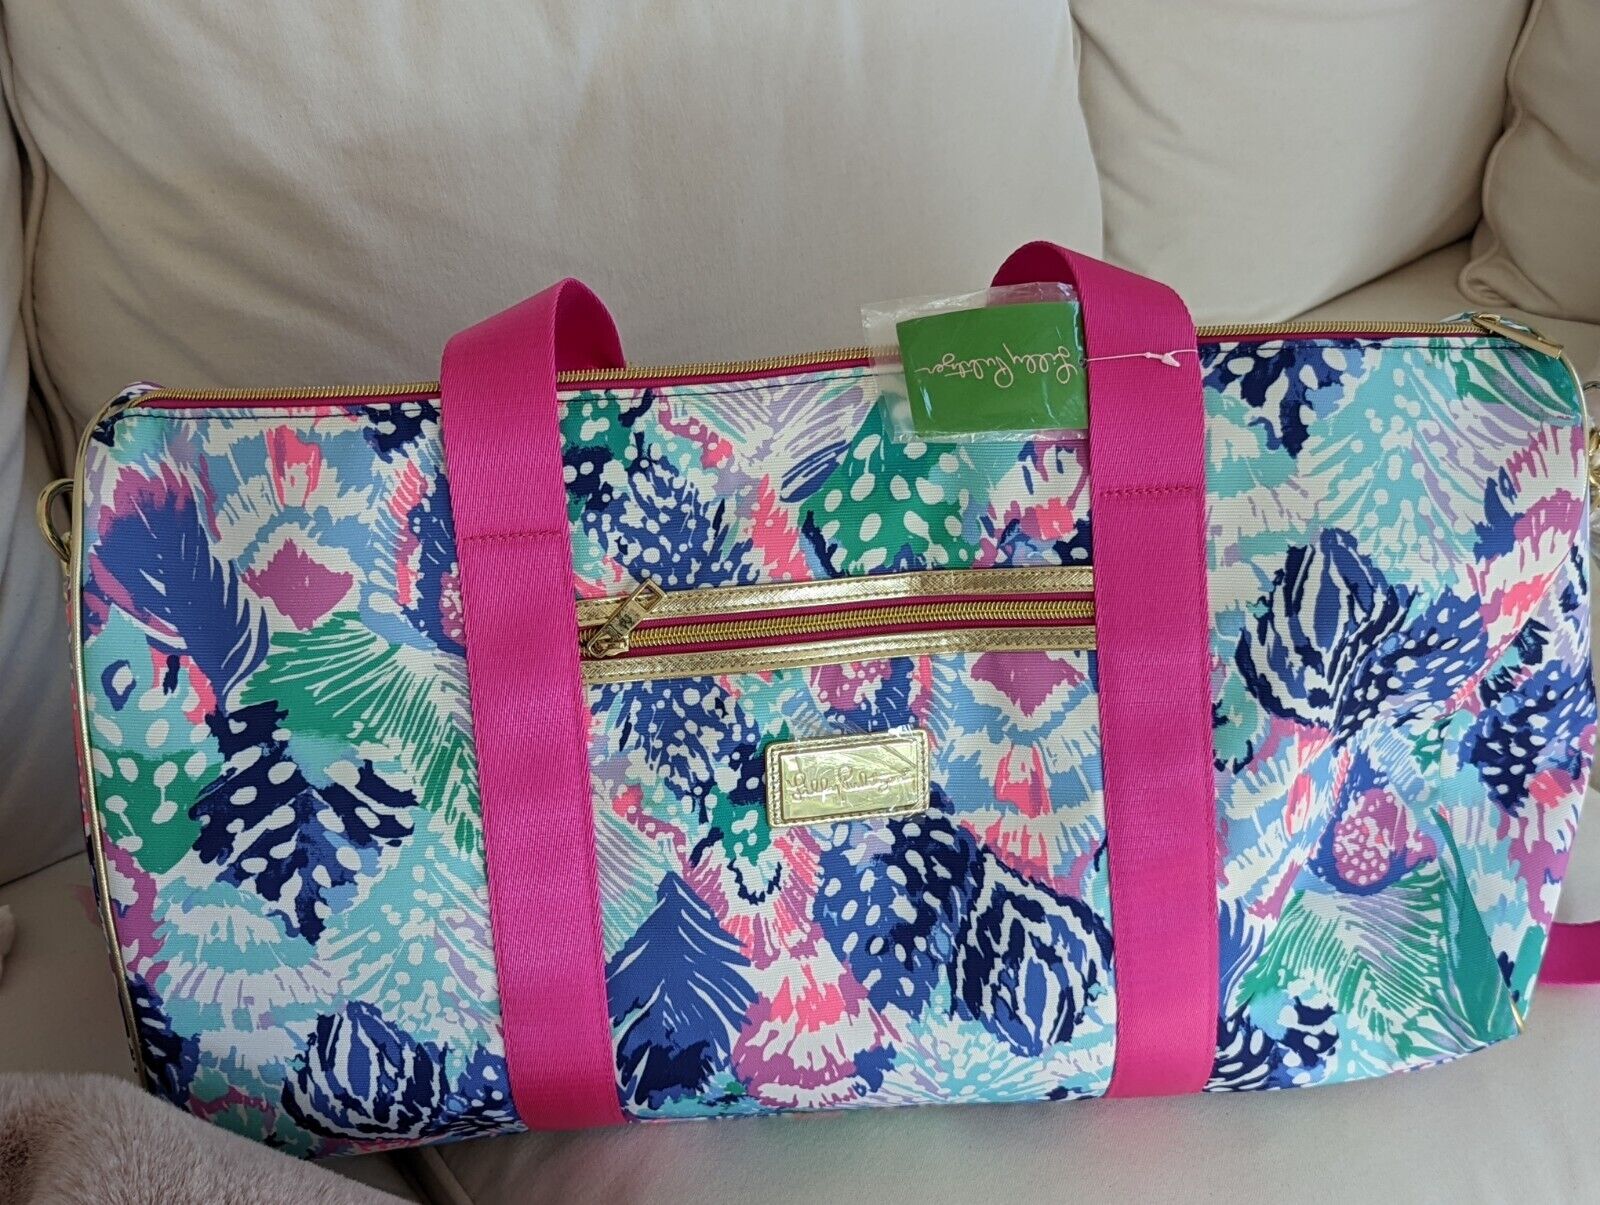 LILLY PULITZER - MARKET CARRYALL FROM SUITE VIEWS | Findlay Rowe Designs